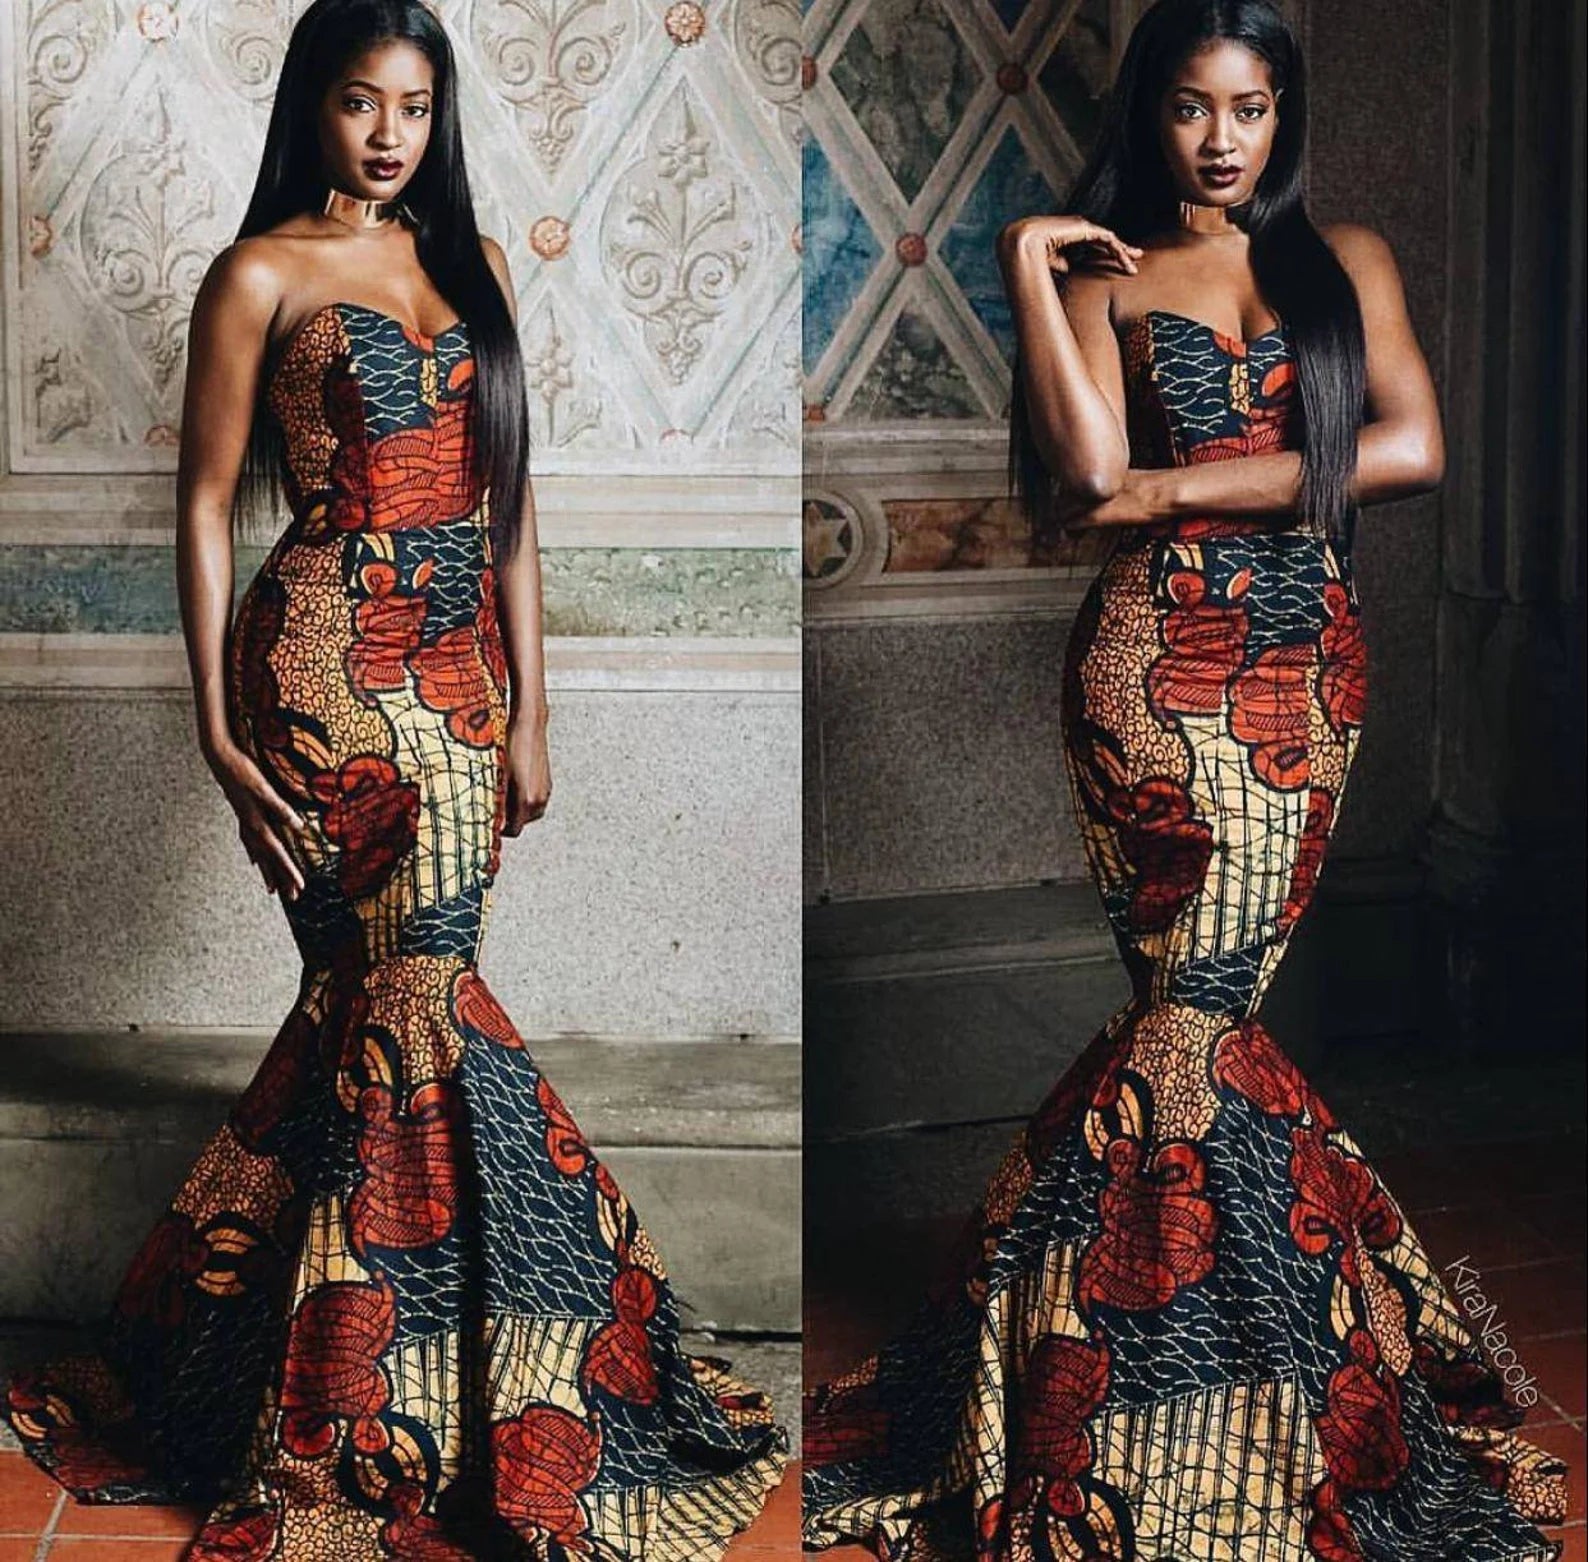 African Print Mermaid Gown - Elegant Banquet Dress | African Maxi Party Dress | Stylish Ankara Fashion Gown - Flexi Africa - Free Delivery Worldwide only at www.flexiafrica.com